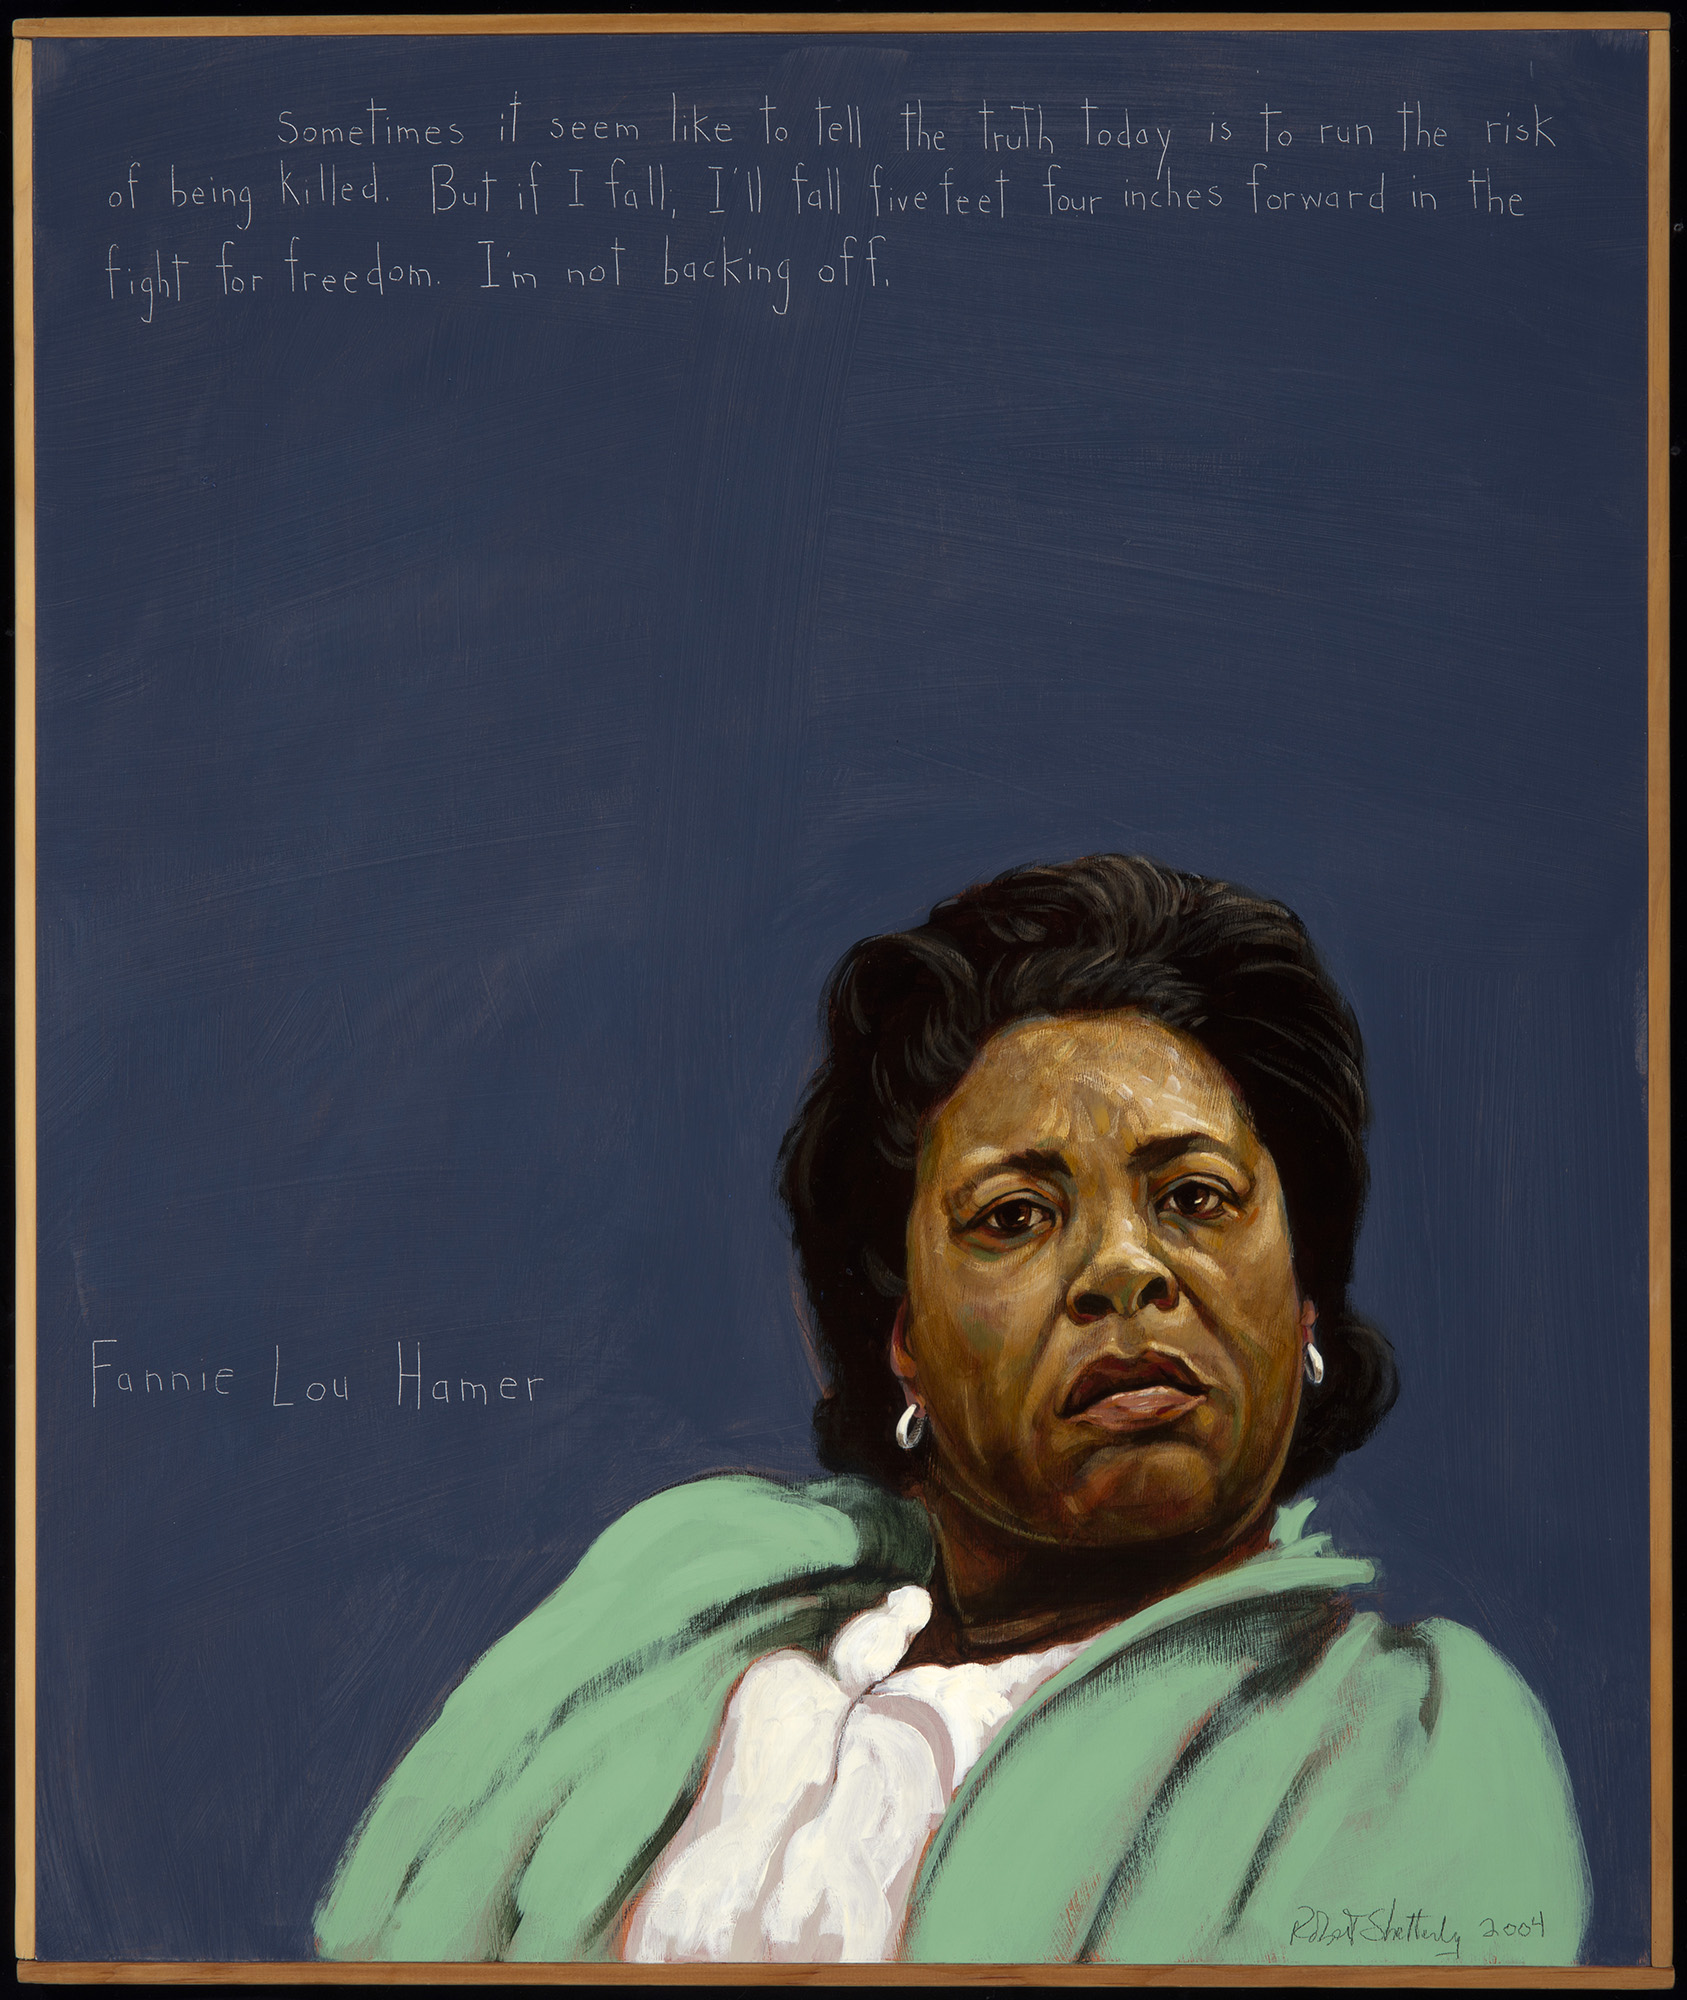 Fannie Lou Hamer, 2004. Portrait by Robert Shetterly. Courtesy of Americans Who Tell the Truth, www.americanswhotellthetruth.org.